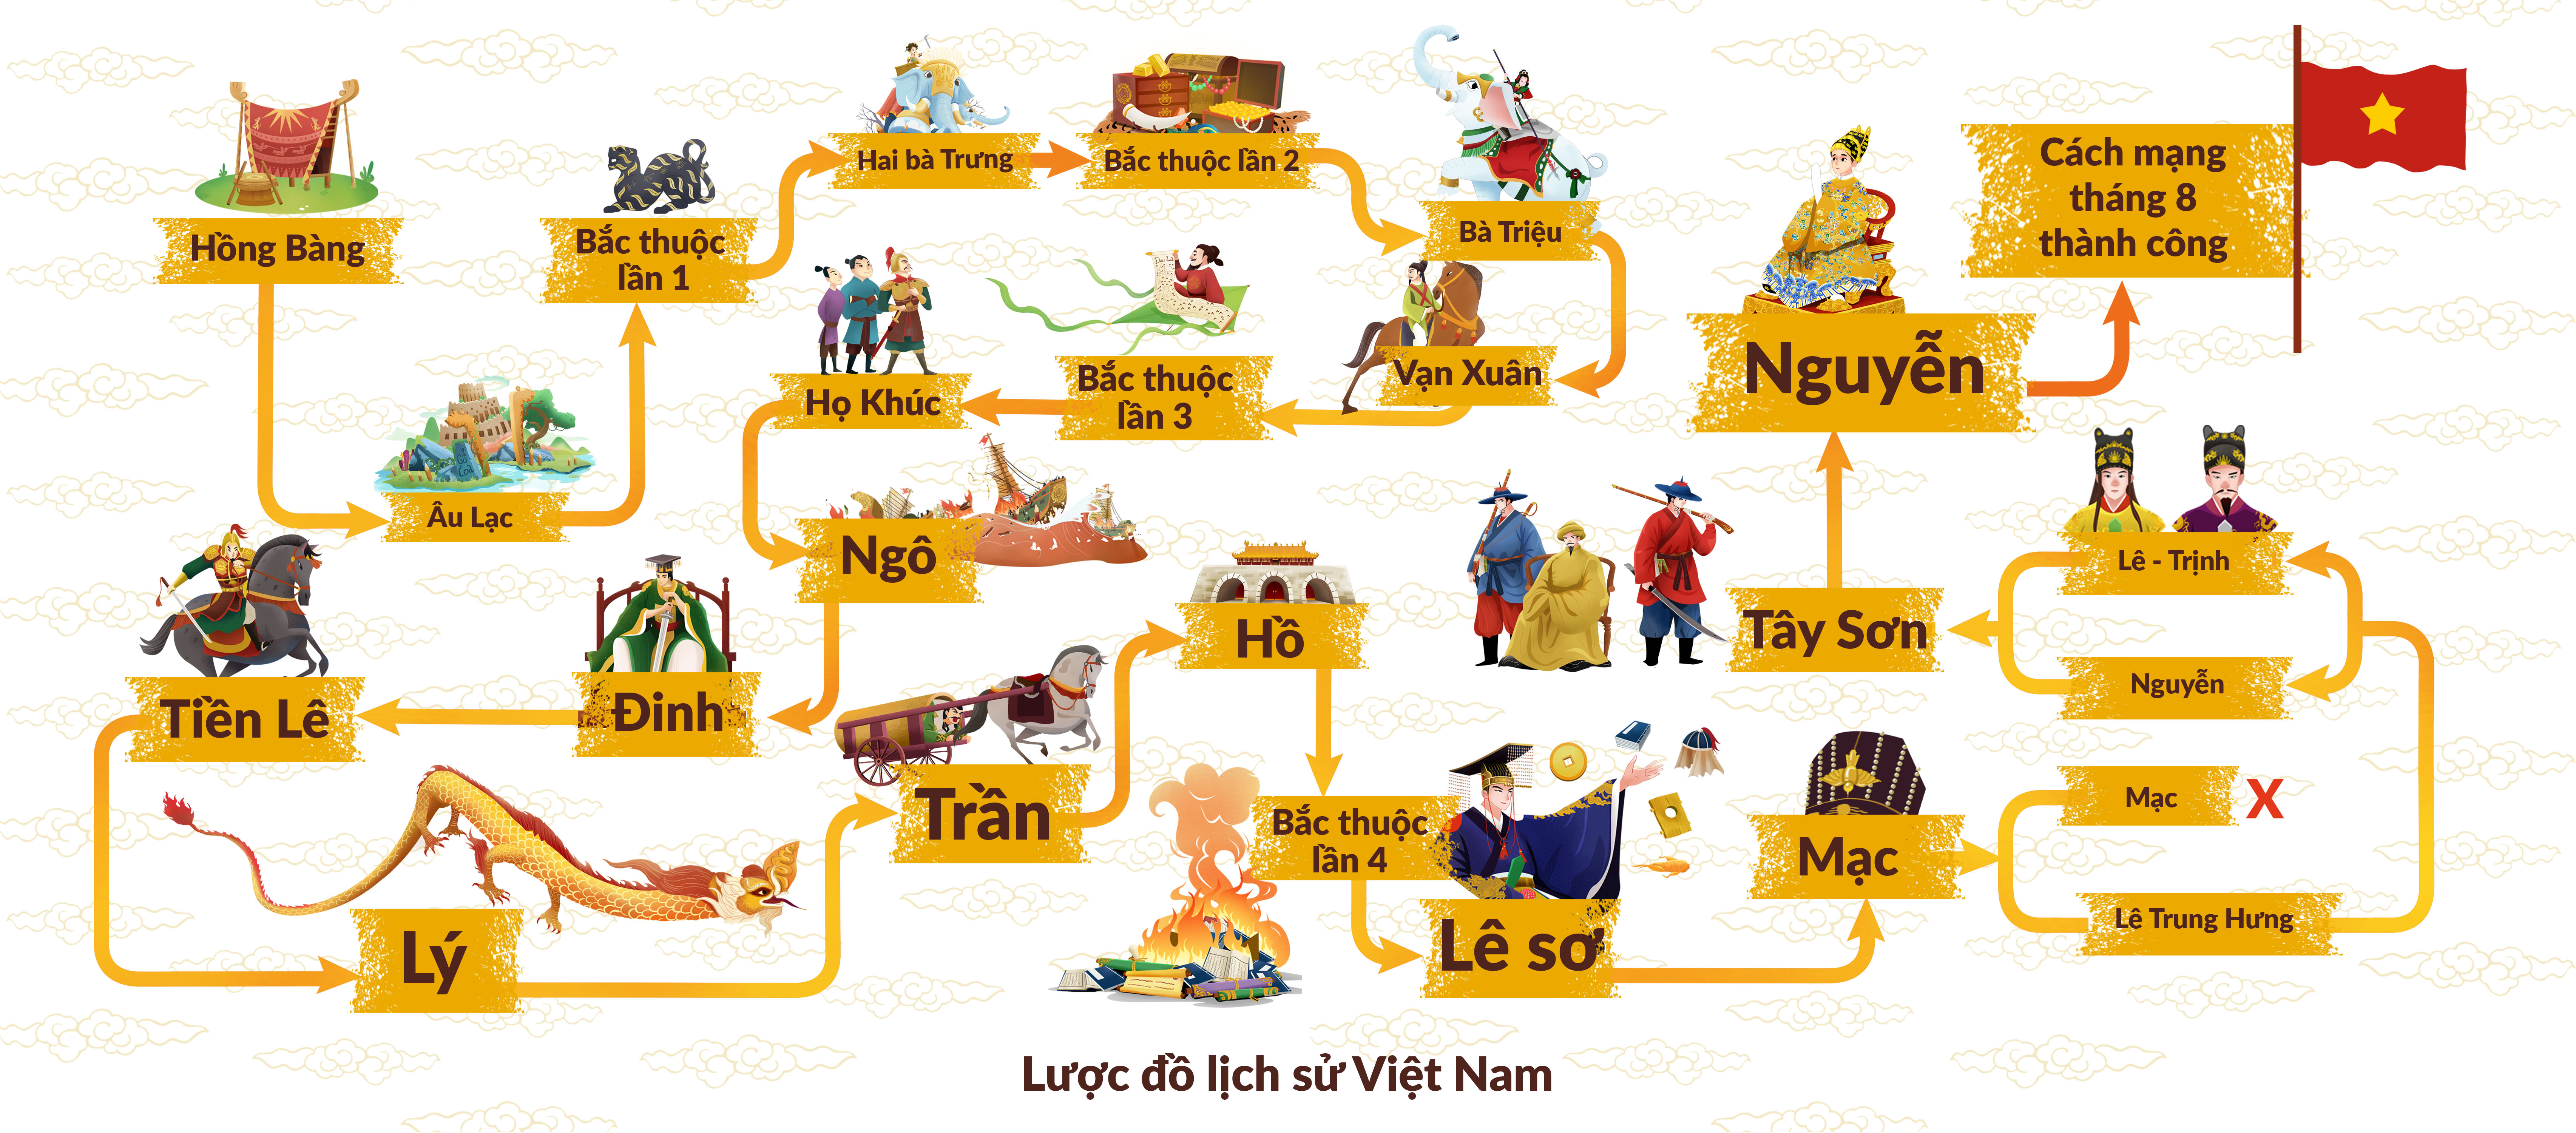 A summarized chart of Vietnamese feudal dynasties in Thanh Huyen’s illustrated history book